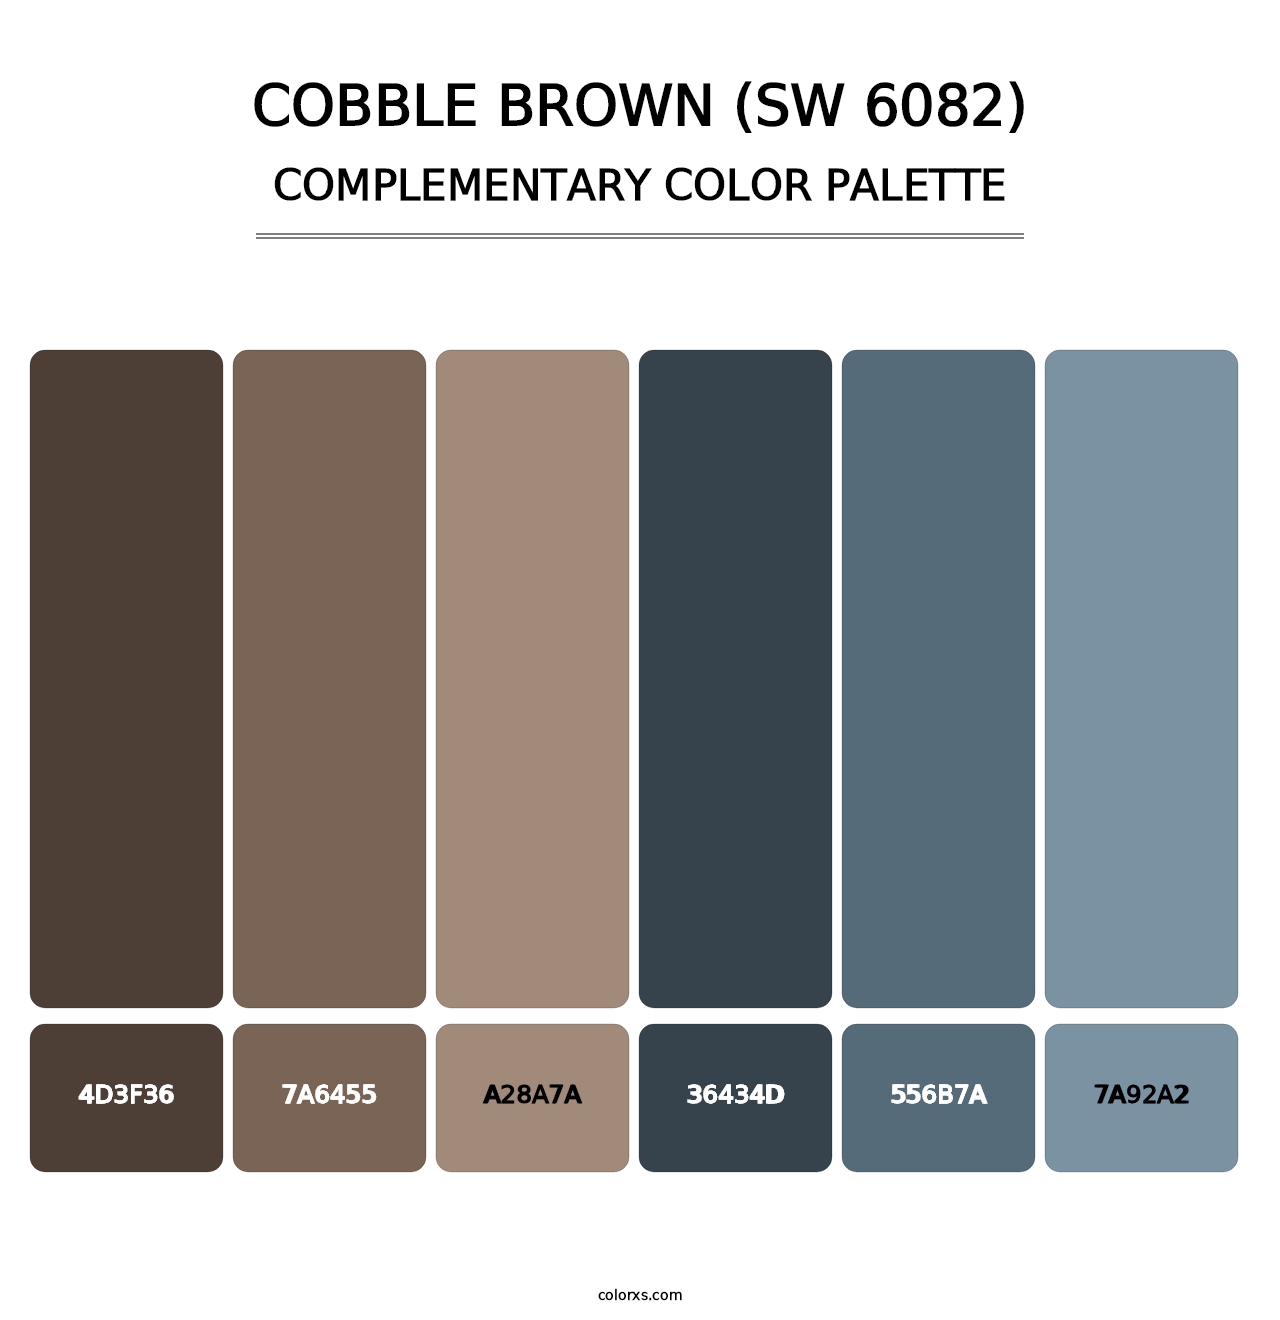 Cobble Brown (SW 6082) - Complementary Color Palette